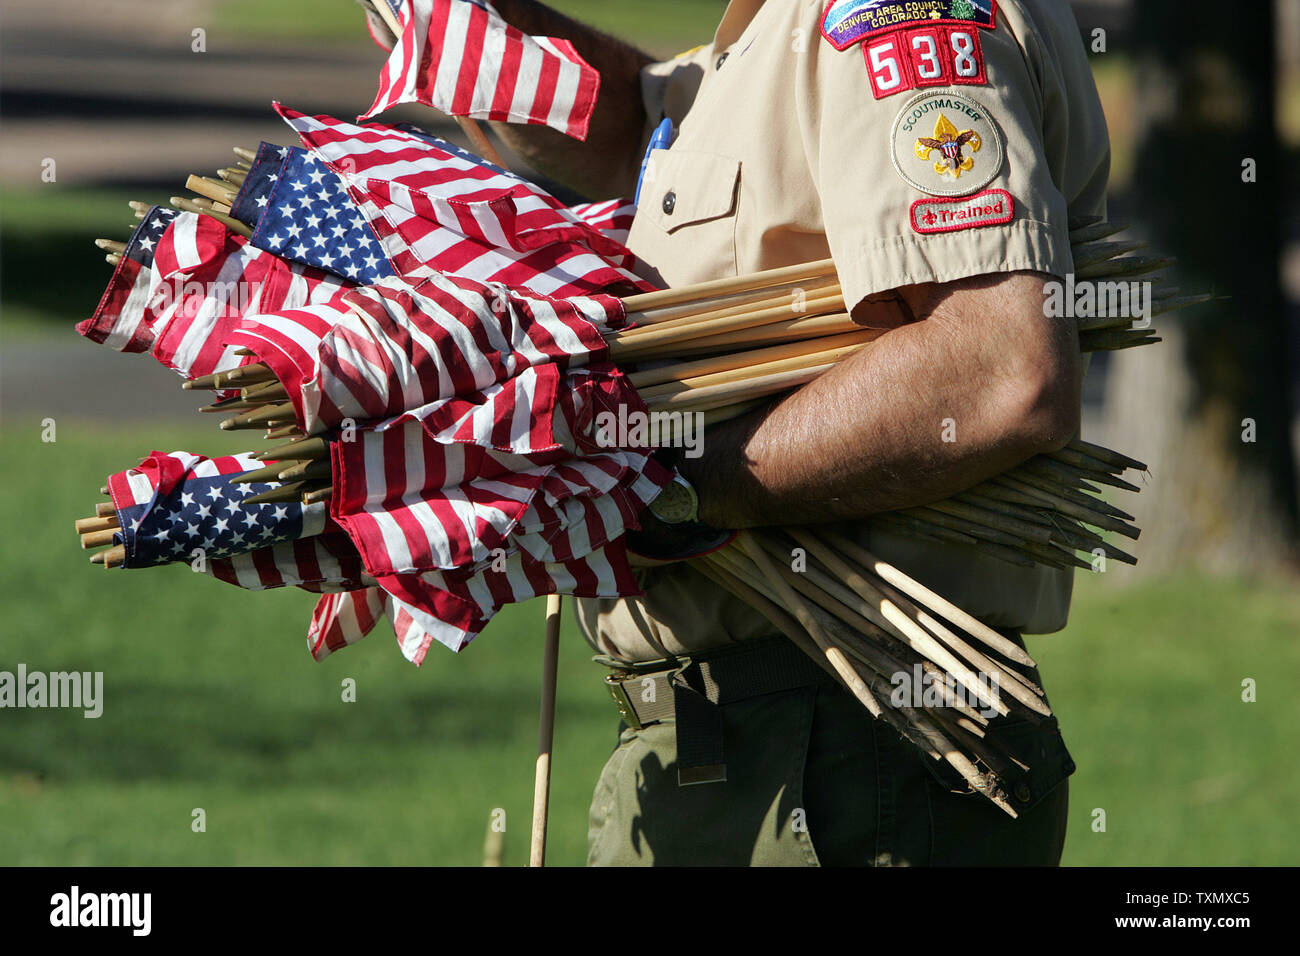 A Scoutmaster carries bundles of American Flags to place for Memorial Day observances at Fort Logan National Cemetery in Denver May 27, 2006.  Fort Logan National Cemetery was created in 1889 and was named after General John A. Logan who issued General Order No. 11 that established Decoration Day on May 30th which later became a National Holiday called Memorial Day.   (UPI Photo/Gary C. Caskey) Stock Photo